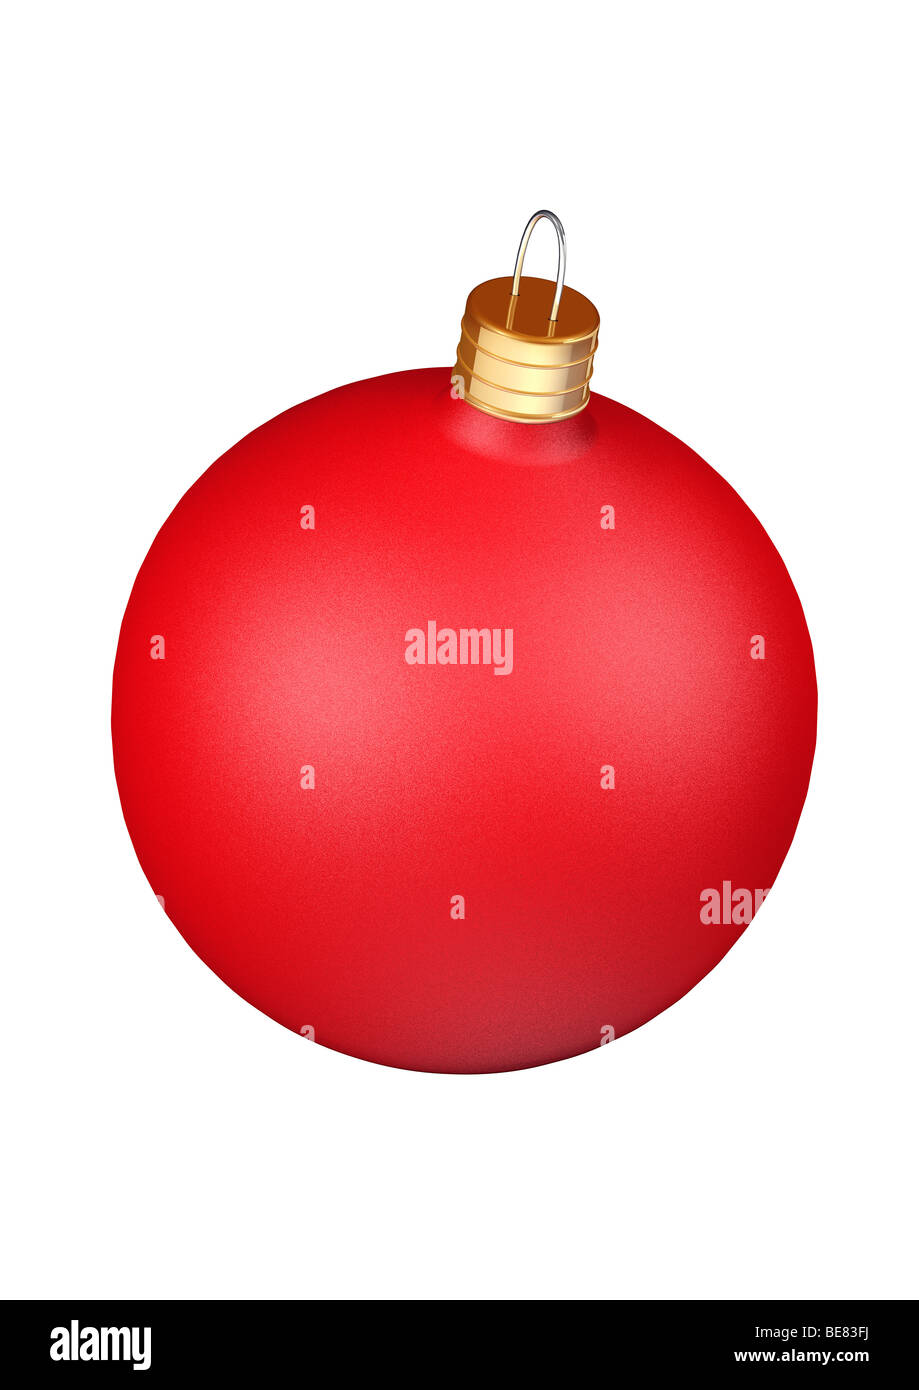 red ornament or bauble for christmas tree on white background Stock Photo